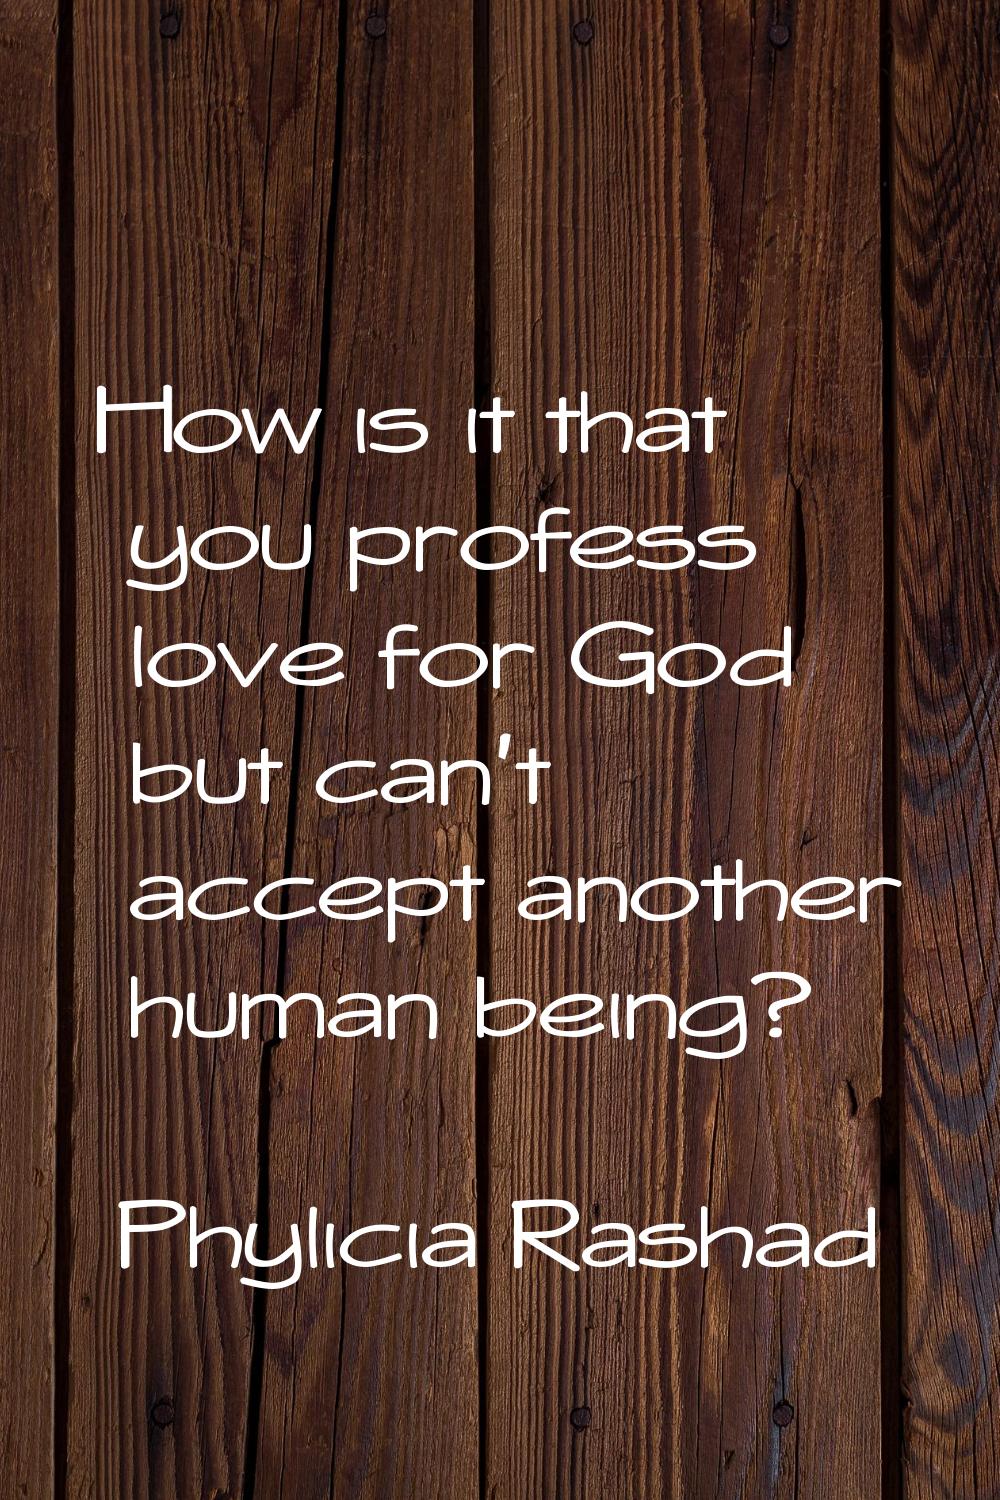 How is it that you profess love for God but can't accept another human being?